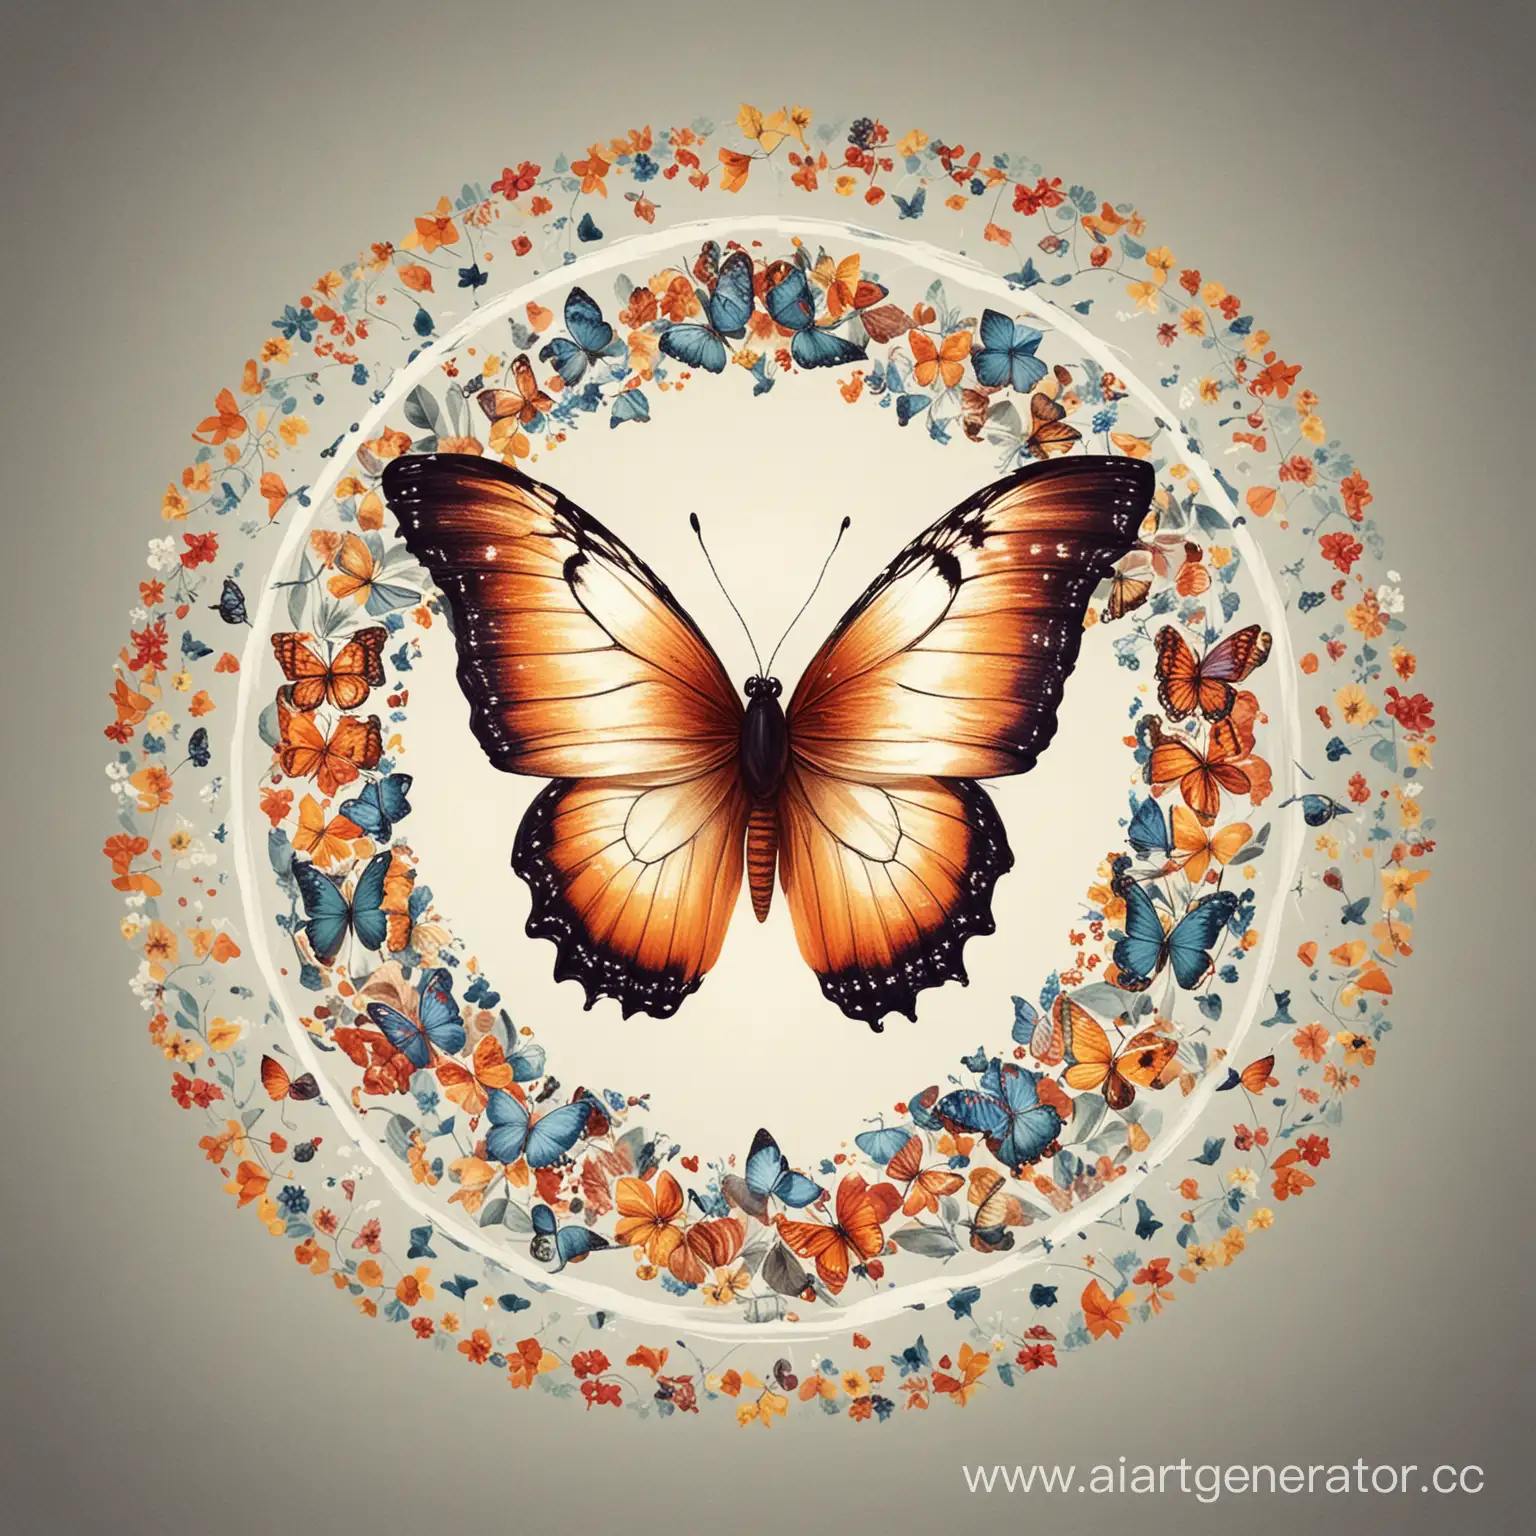 Colorful-Butterfly-Fluttering-in-Circular-Pattern